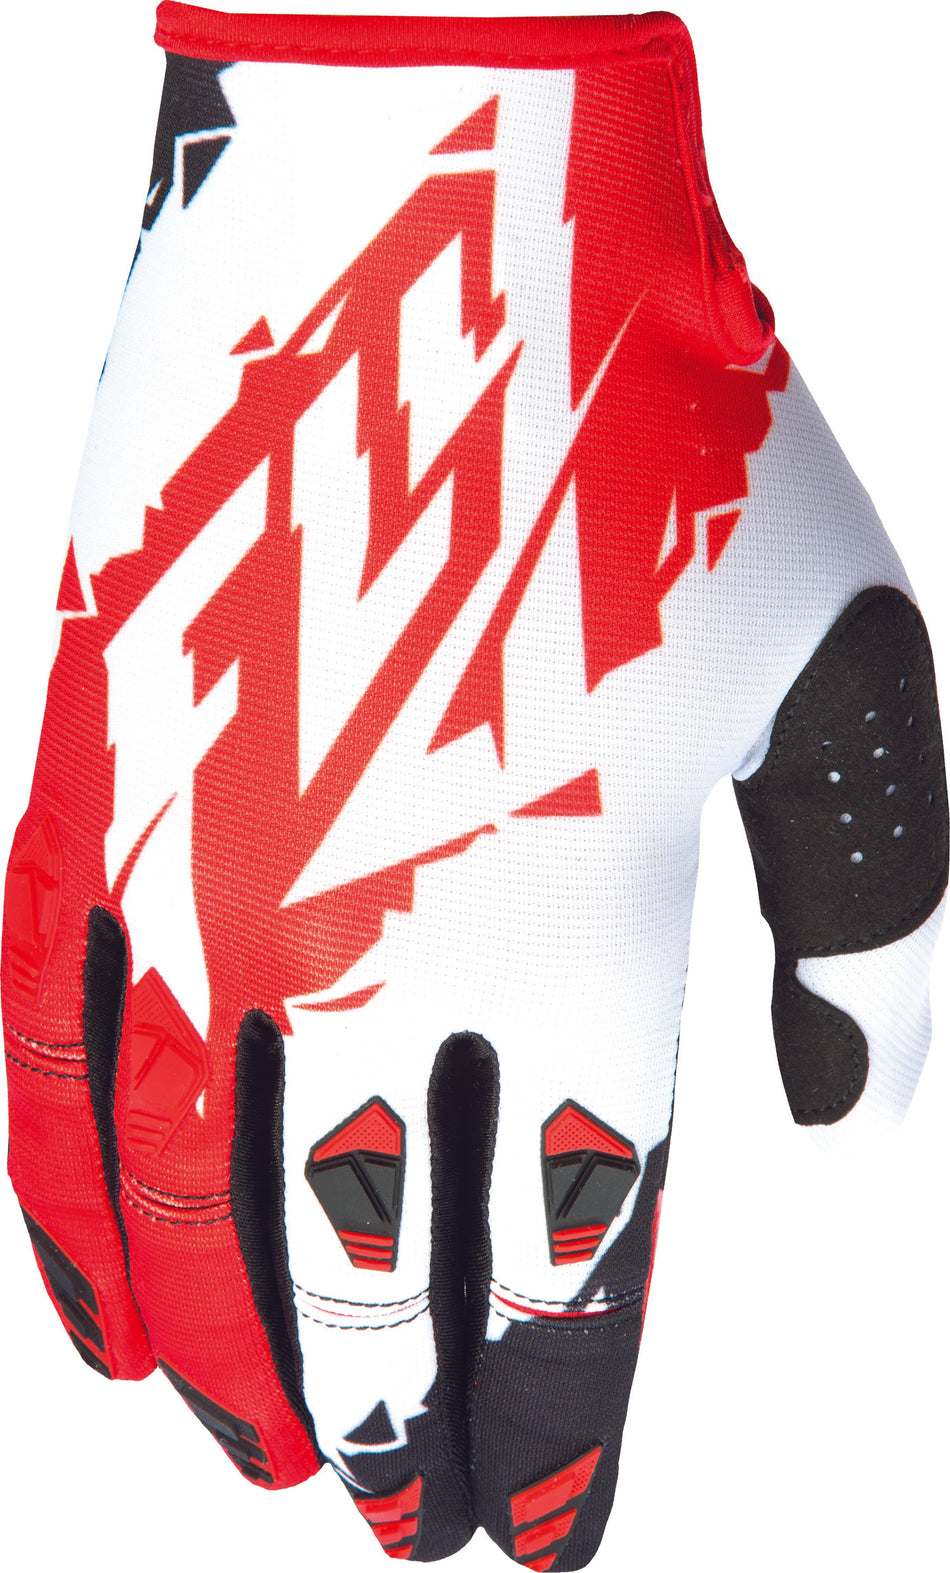 FLY RACING Kinetic Glove Red/White Sz 12 2x 370-41412